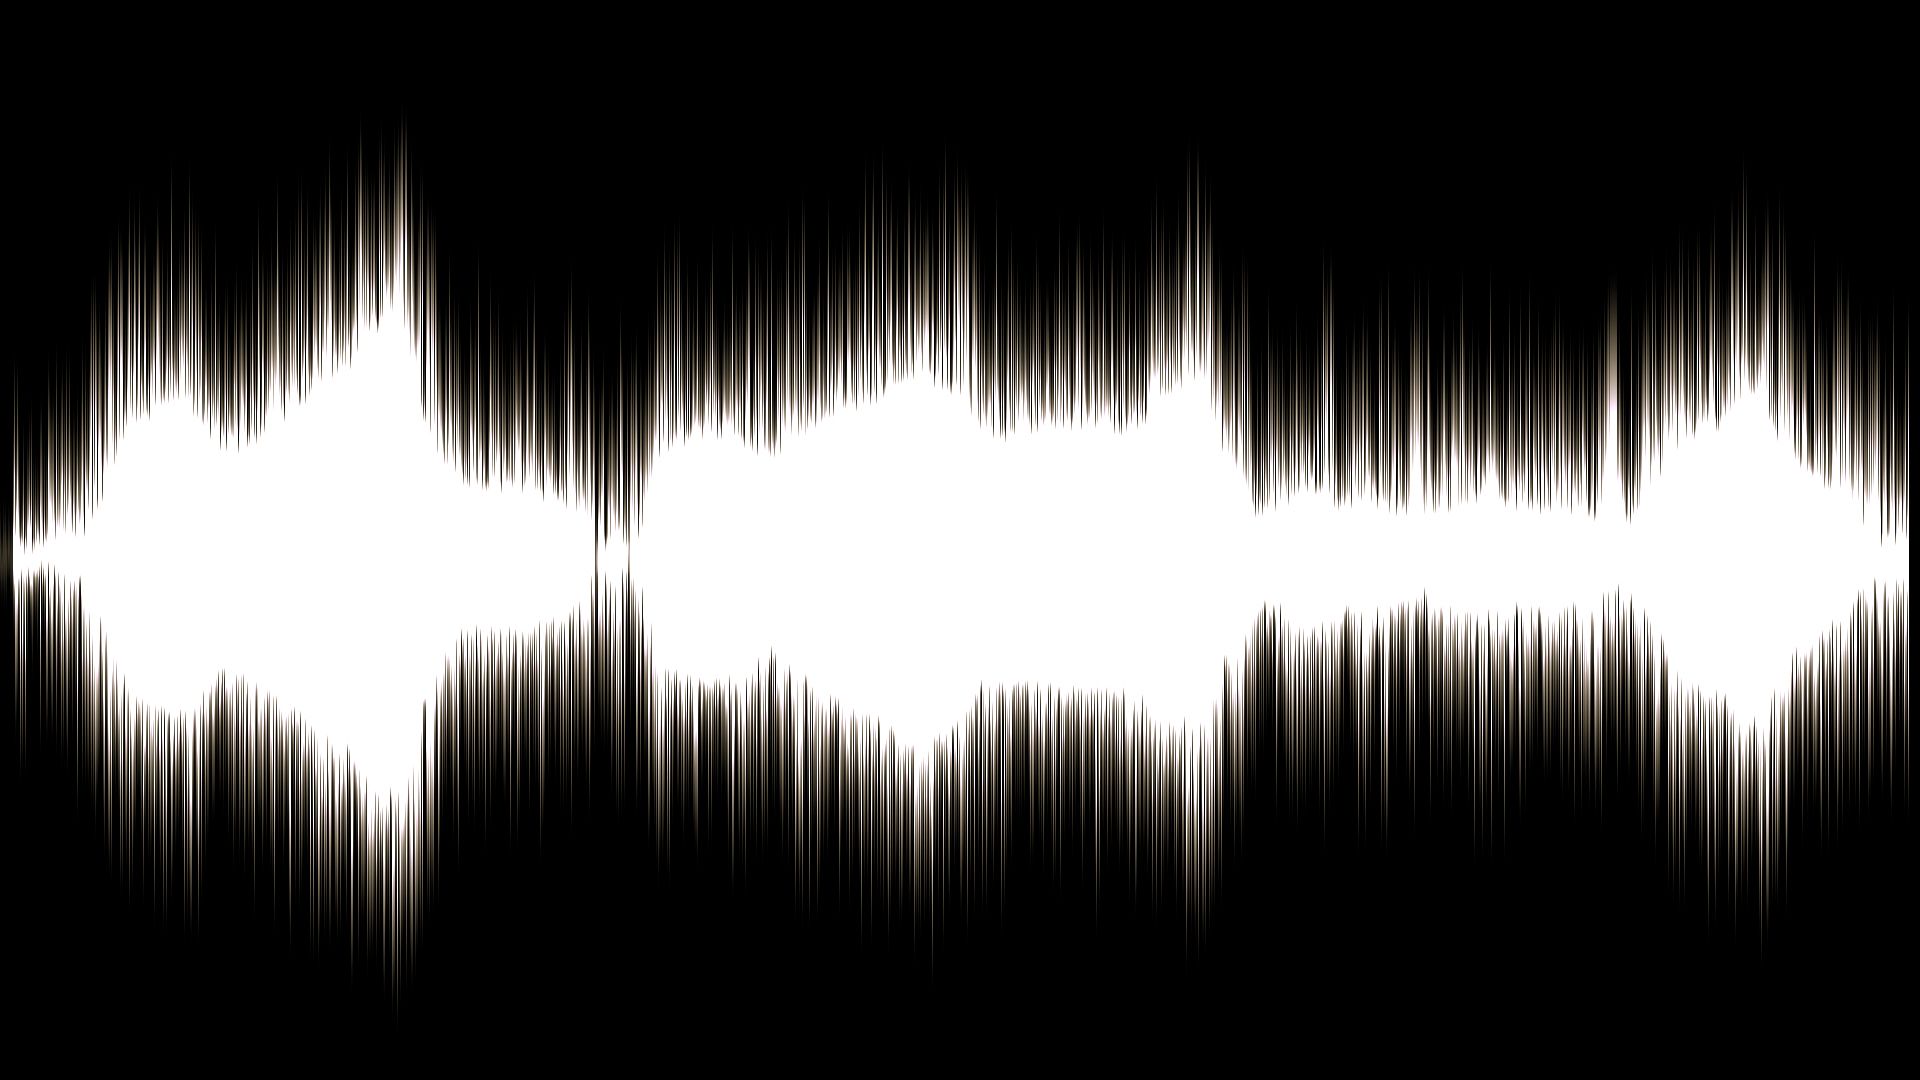 Free download Sound Waves Music HD for [1920x1080] for your Desktop, Mobile & Tablet. Explore Music Sound Waves Live Wallpaper. Sound Wave Wallpaper, Desktop Wallpaper with Sound, Live